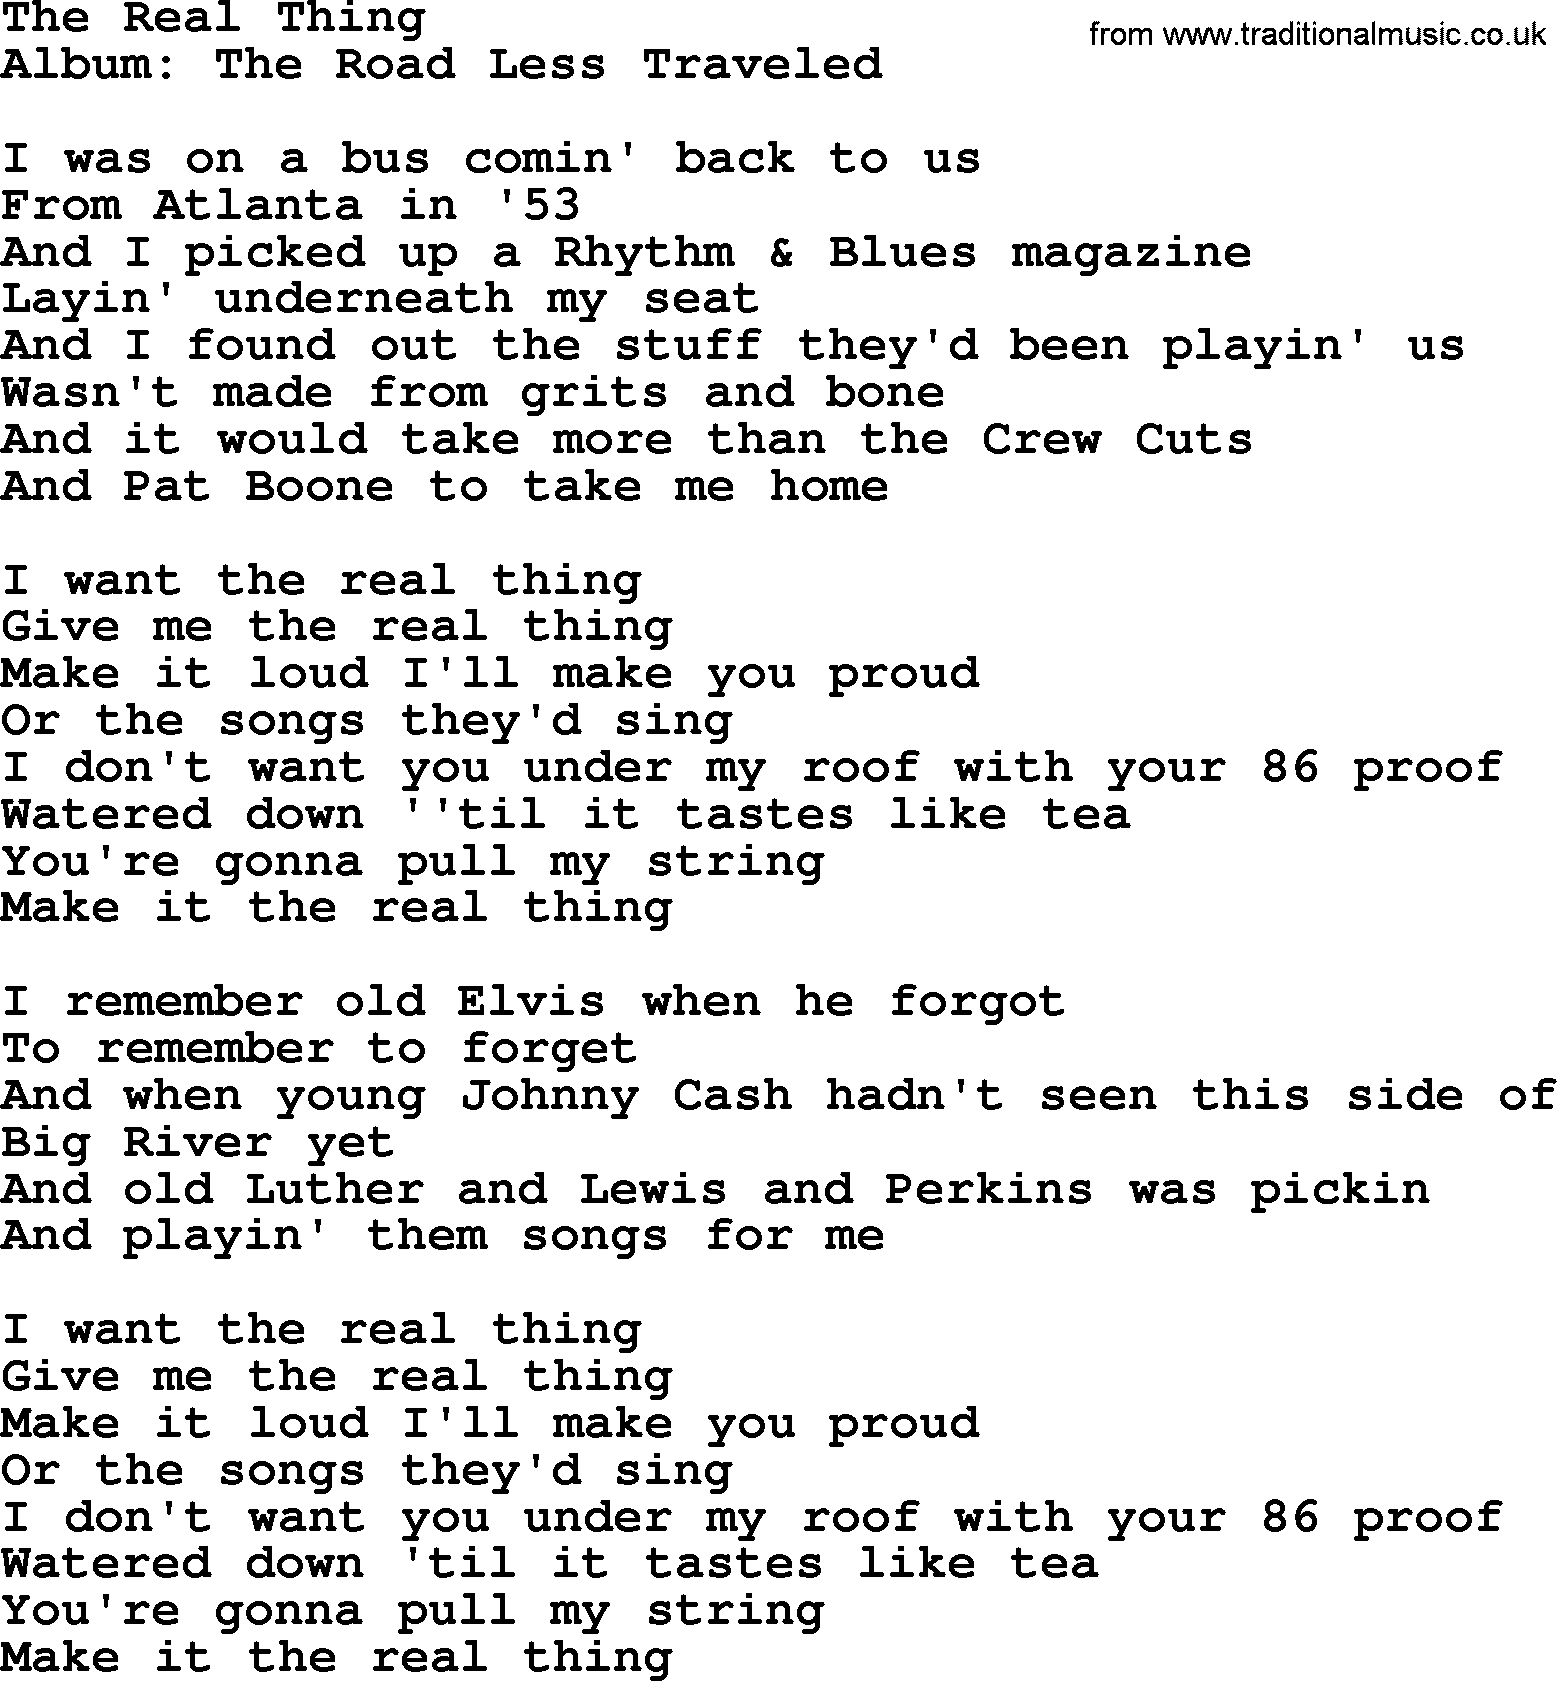 George Strait song: The Real Thing, lyrics